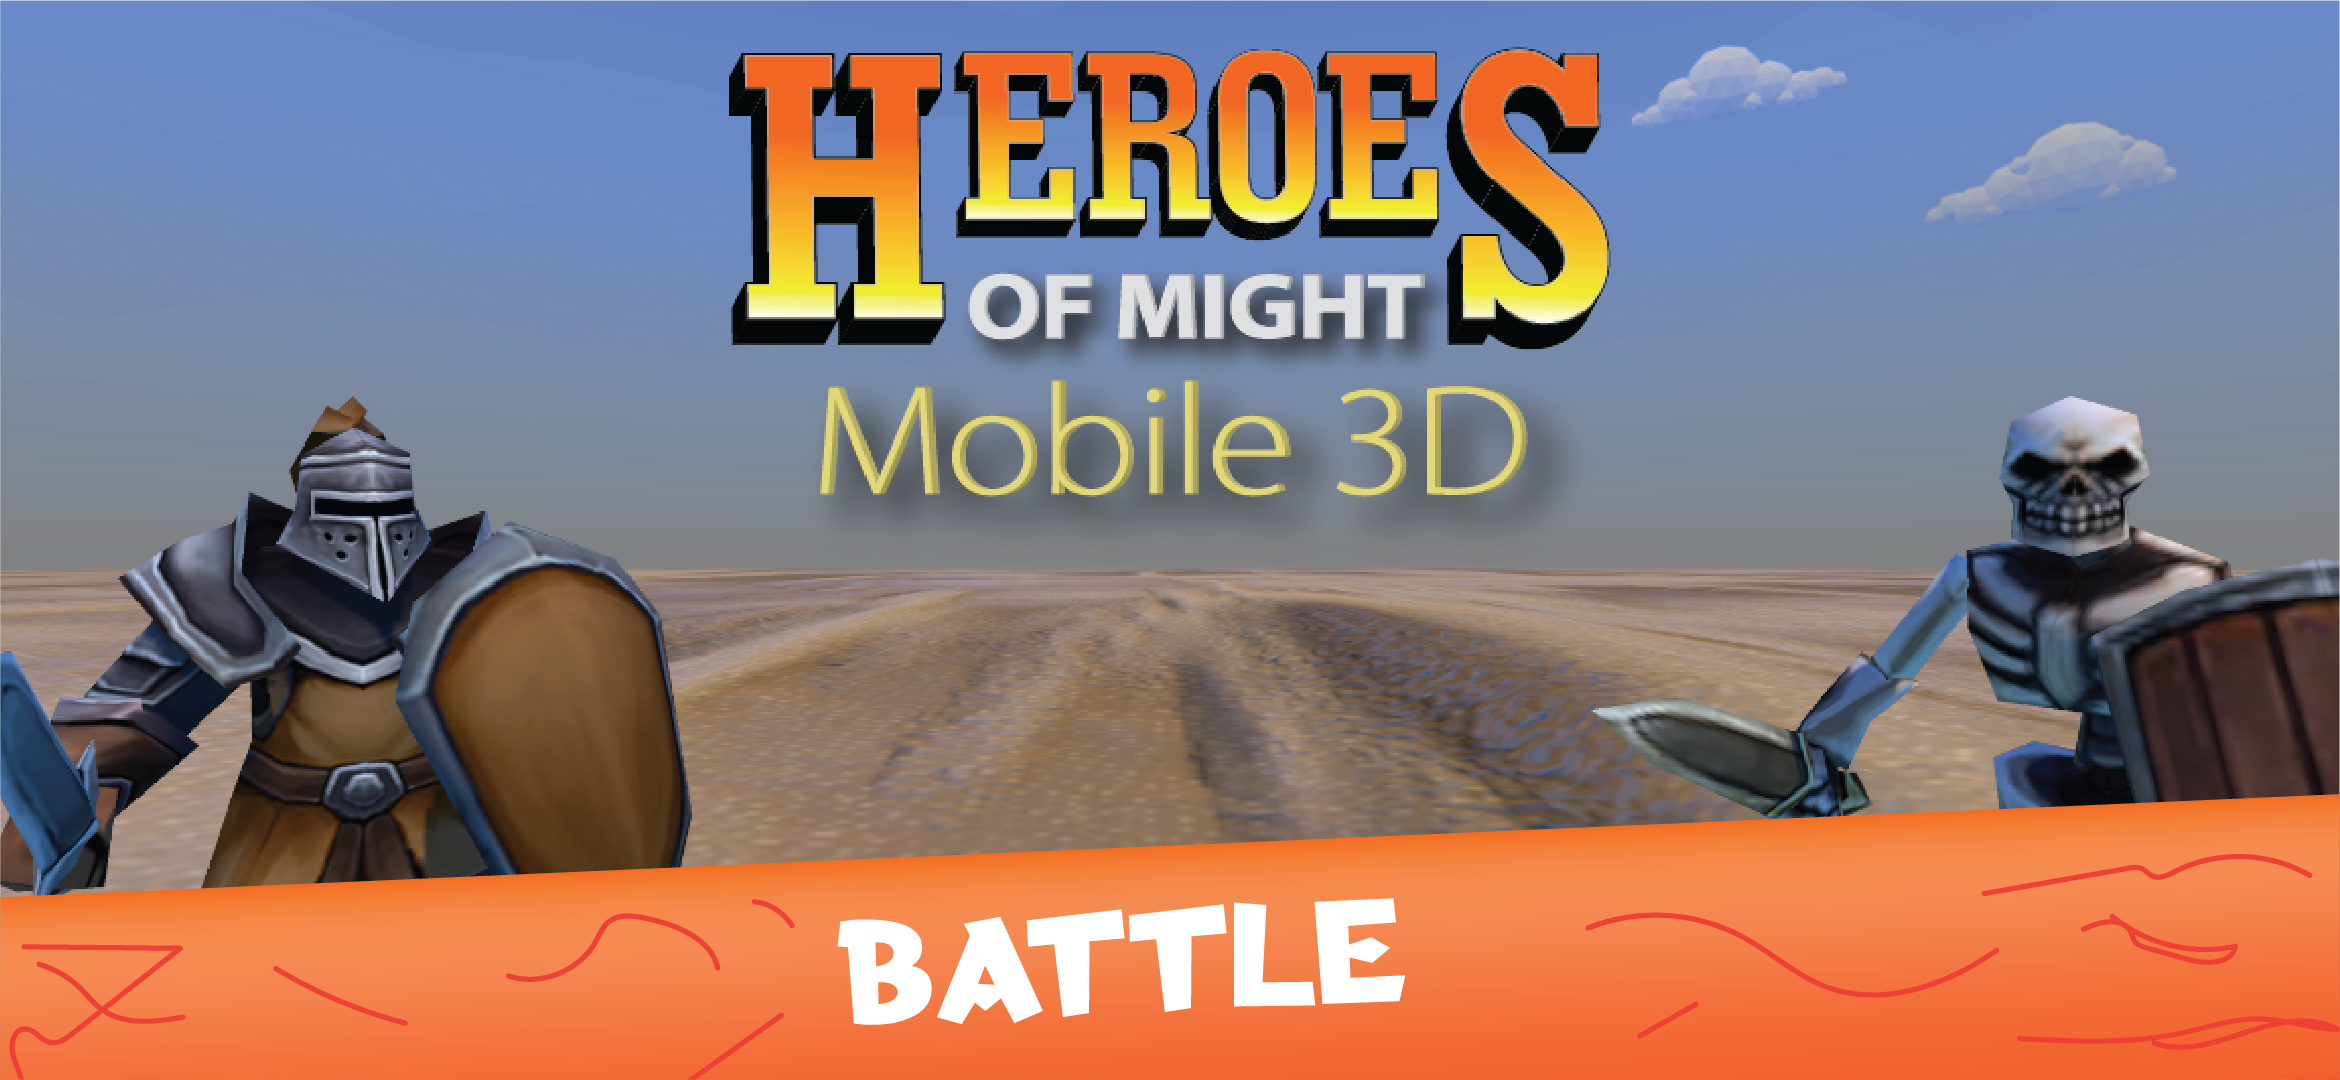 Heroes of Might Mobile 3D 게임 스크린 샷